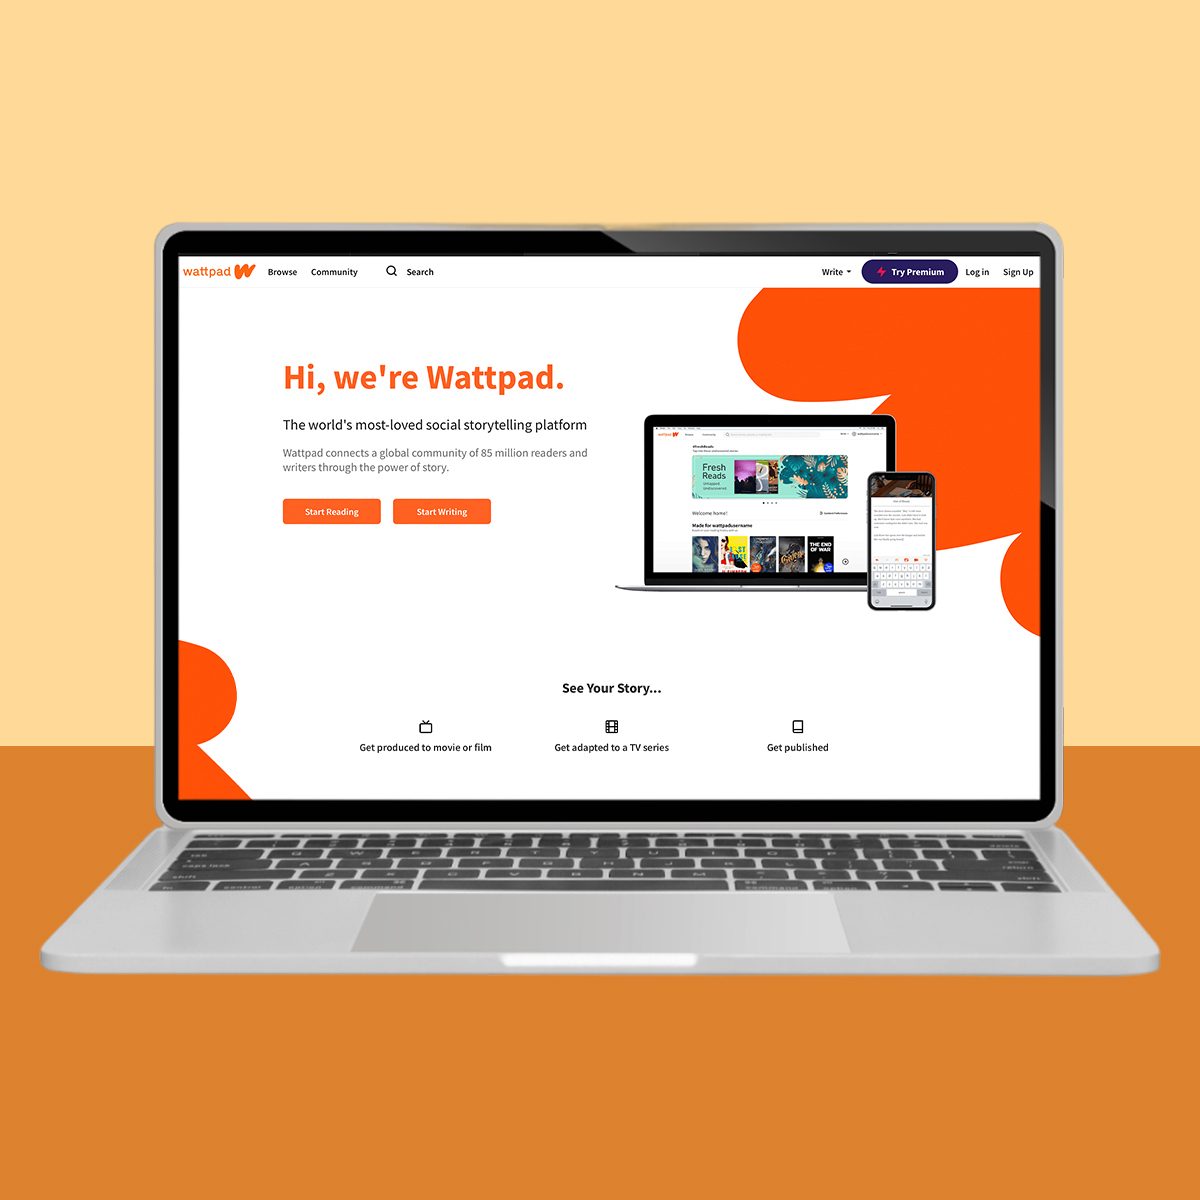 <p><strong>Good for:</strong> New writers</p> <p>Wattpad is an e-reading website that connects a community of 80 million readers and writers. Original books are uploaded directly to the platform for users to read. You have to create an account to read the books, but once you find a free book you want to read, click on the cover, then click the "Read" button to get started.</p> <p><strong>Pros: </strong></p> <ul> <li>Readers get to vote on stories and see how many others have read them</li> <li>Stories on Wattpad may later get publishing or filming deals—and if you read them on Wattpad, then you "discovered" them first</li> <li>Great source if you love <a href="https://www.rd.com/list/fantasy-romance-books/" rel="noreferrer noopener noreferrer">fantasy romance books</a>, including books about werewolves or vampires</li> </ul> <p><strong>Cons:</strong></p> <ul> <li>Some books are not available for free but require payment</li> <li>Not all books will be complete at the time you start them</li> </ul> <p class="listicle-page__cta-button-shop"><a class="shop-btn" href="https://www.wattpad.com/">Read Now </a></p>